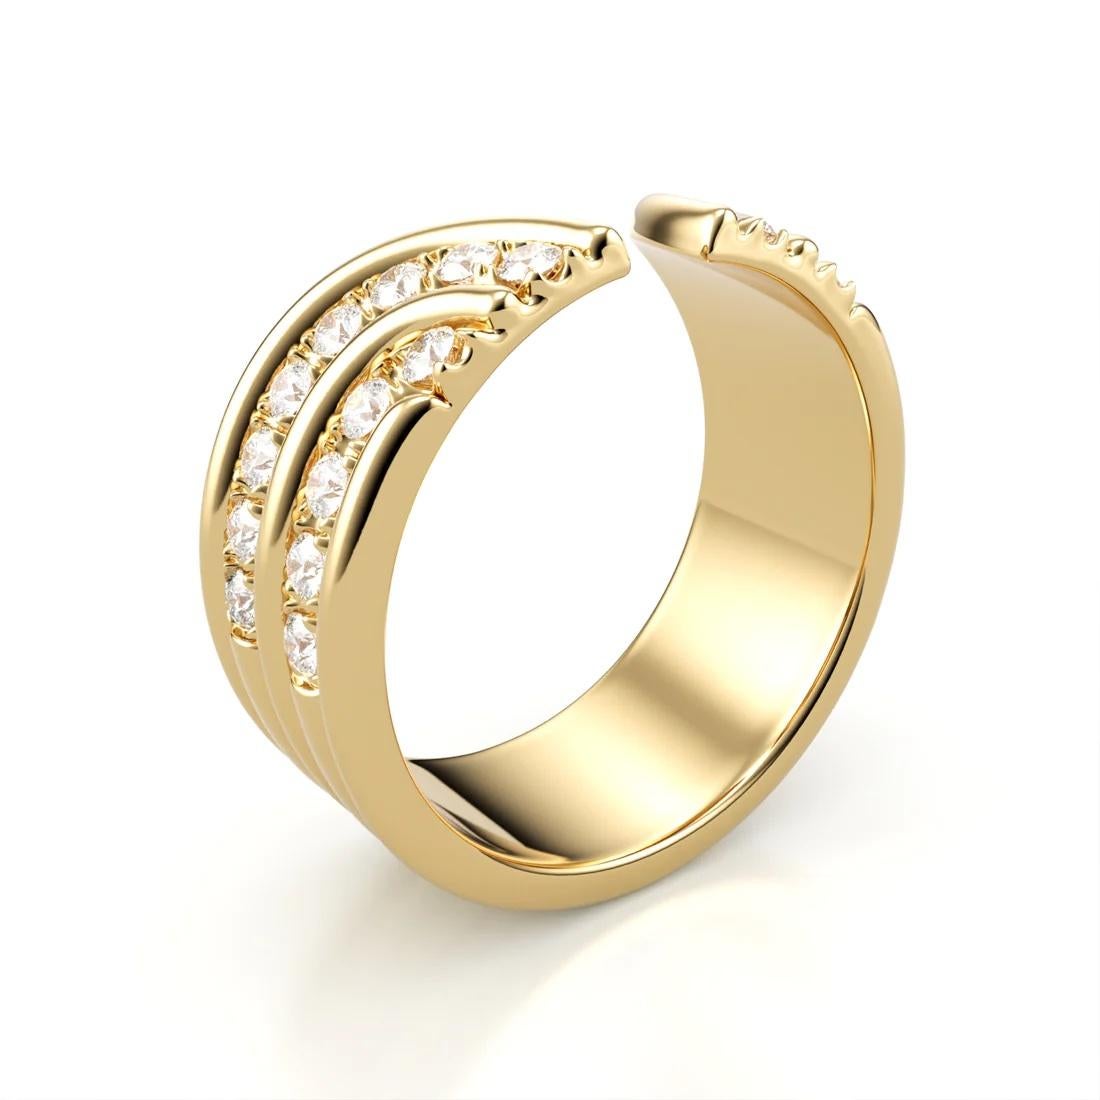 Contemporary Casey Perez 14K gold open band with ribbed detail and diamond pave- sz 8 For Sale